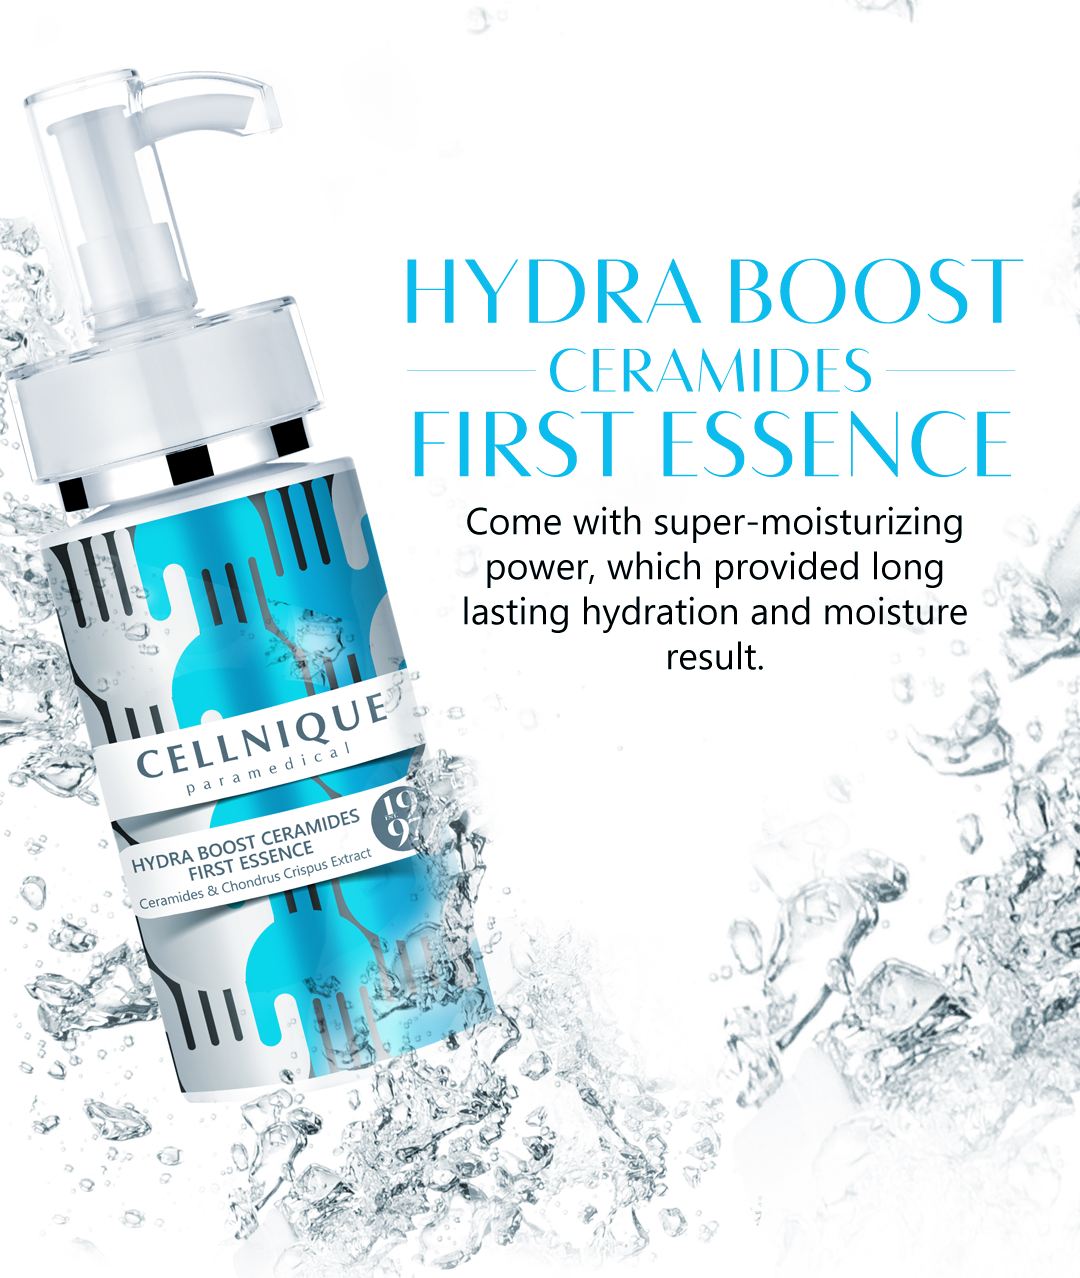 Hydra-Boost-Ceramides-First-Essence-Infographic_1080-1.png